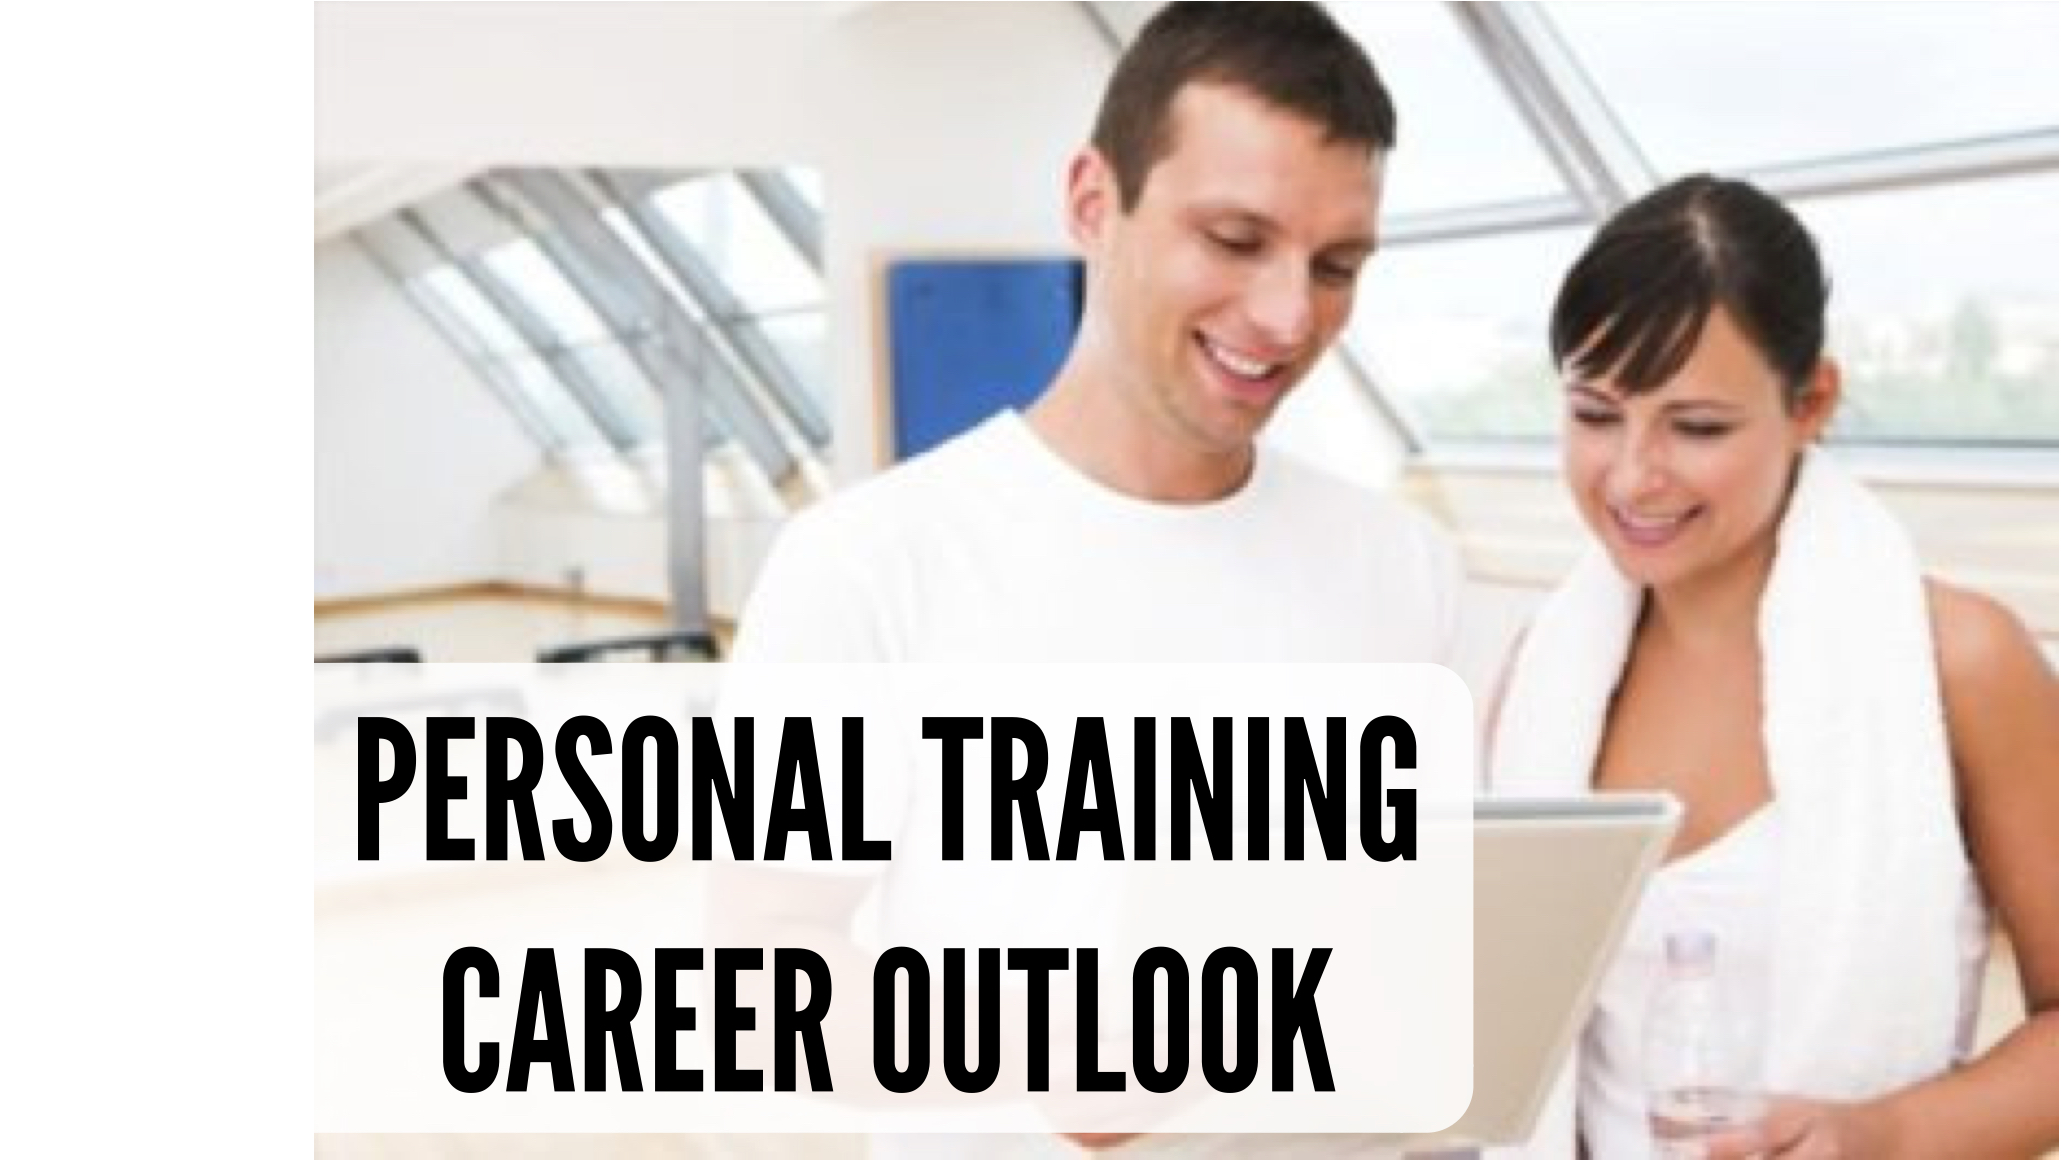 Personal Training Career Outlook